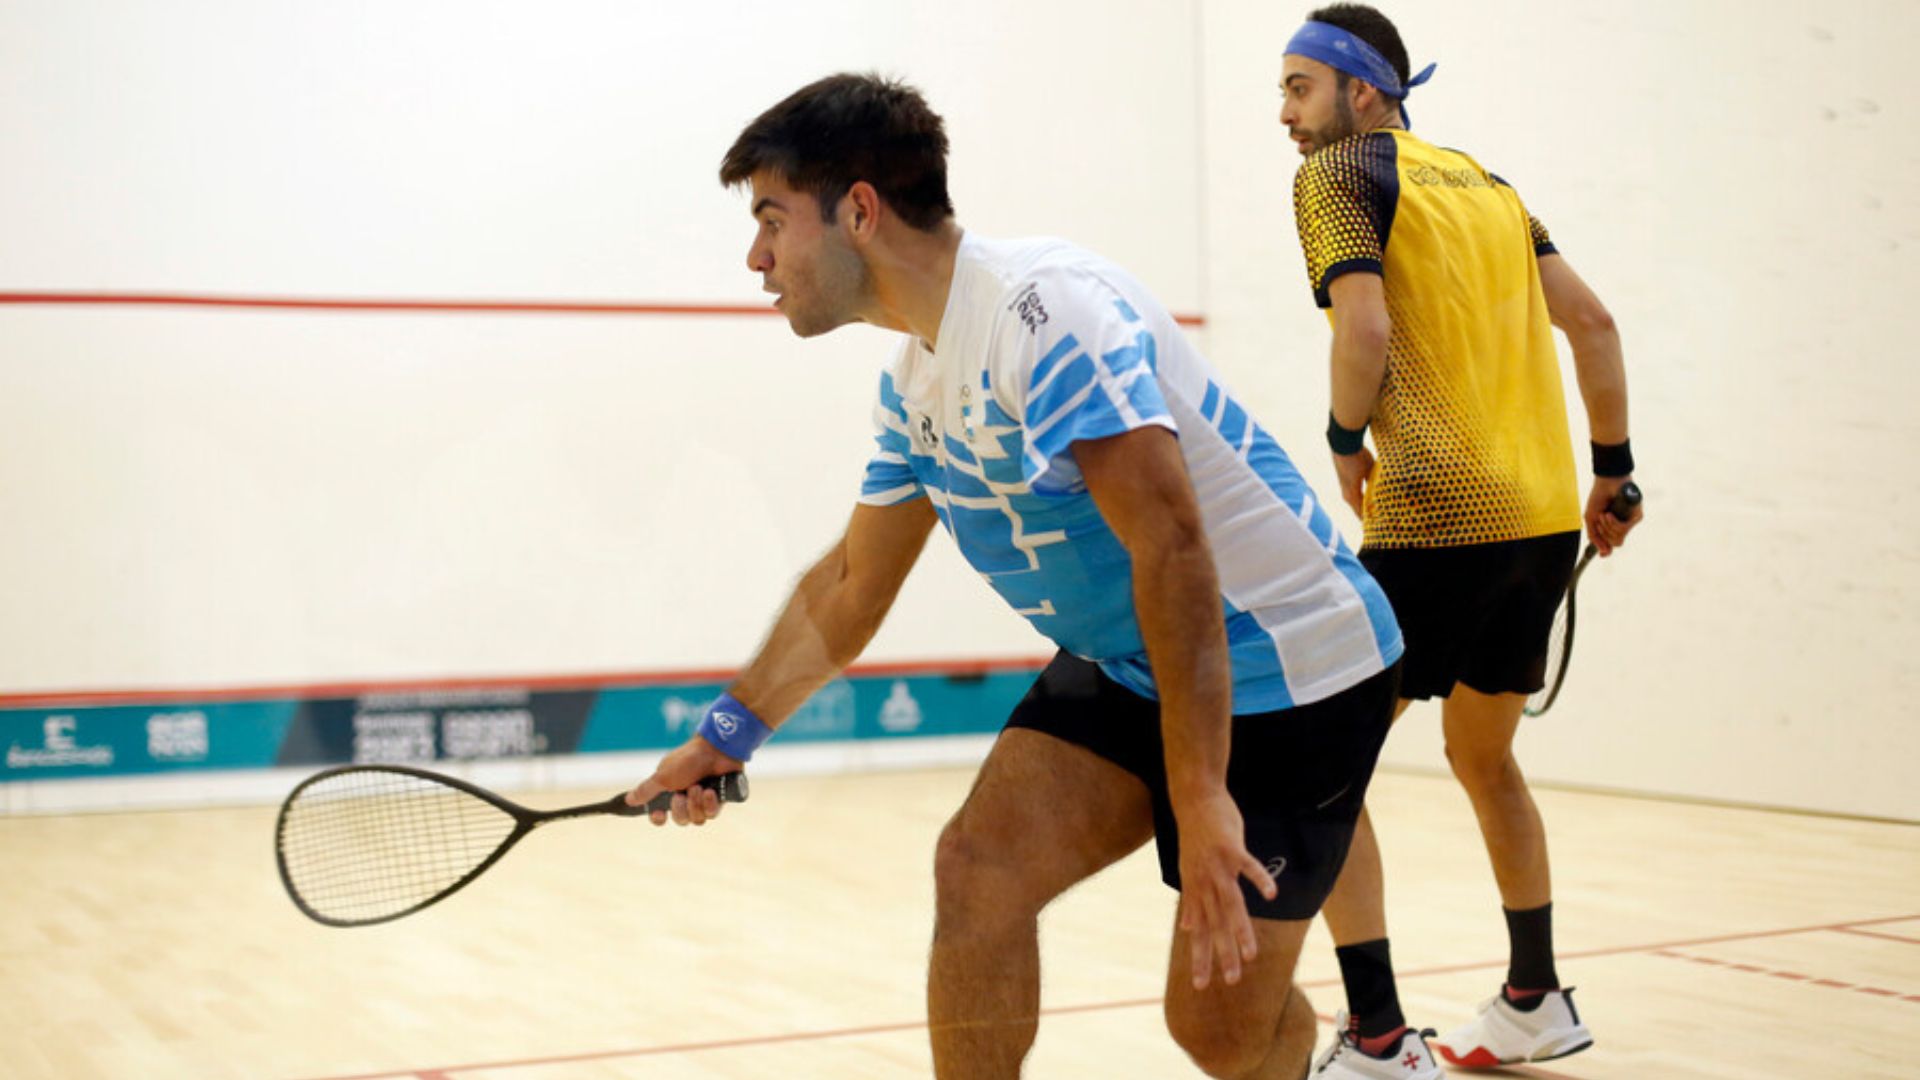 Squash: Colombia Defeats Argentina in Male's Final